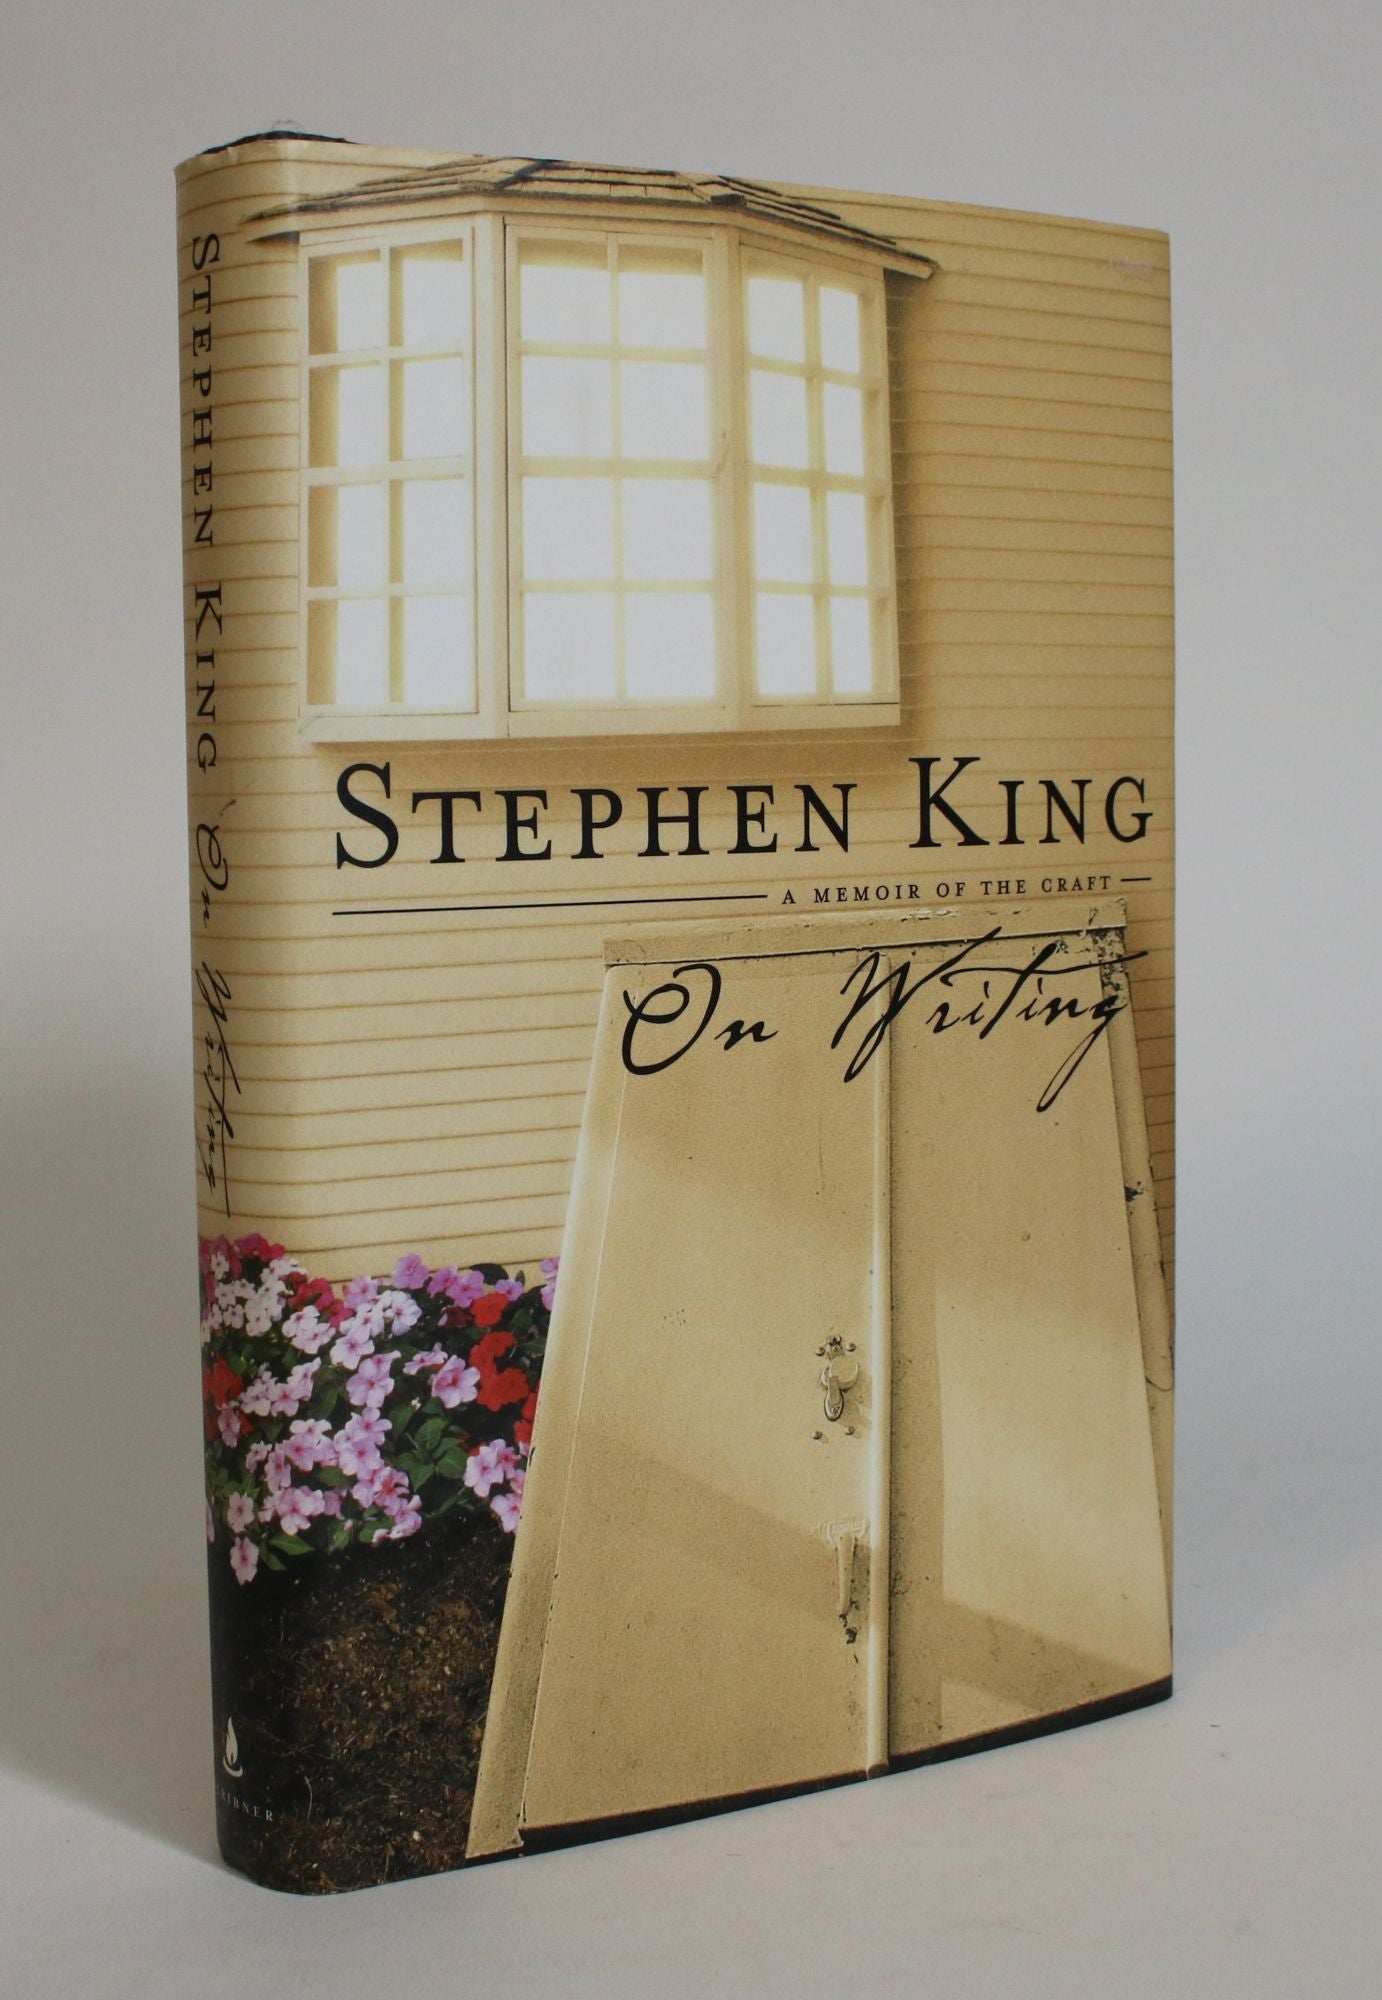 Edition　King　Writing:　On　Stephen　Craft　The　A　Of　Memoir　1st